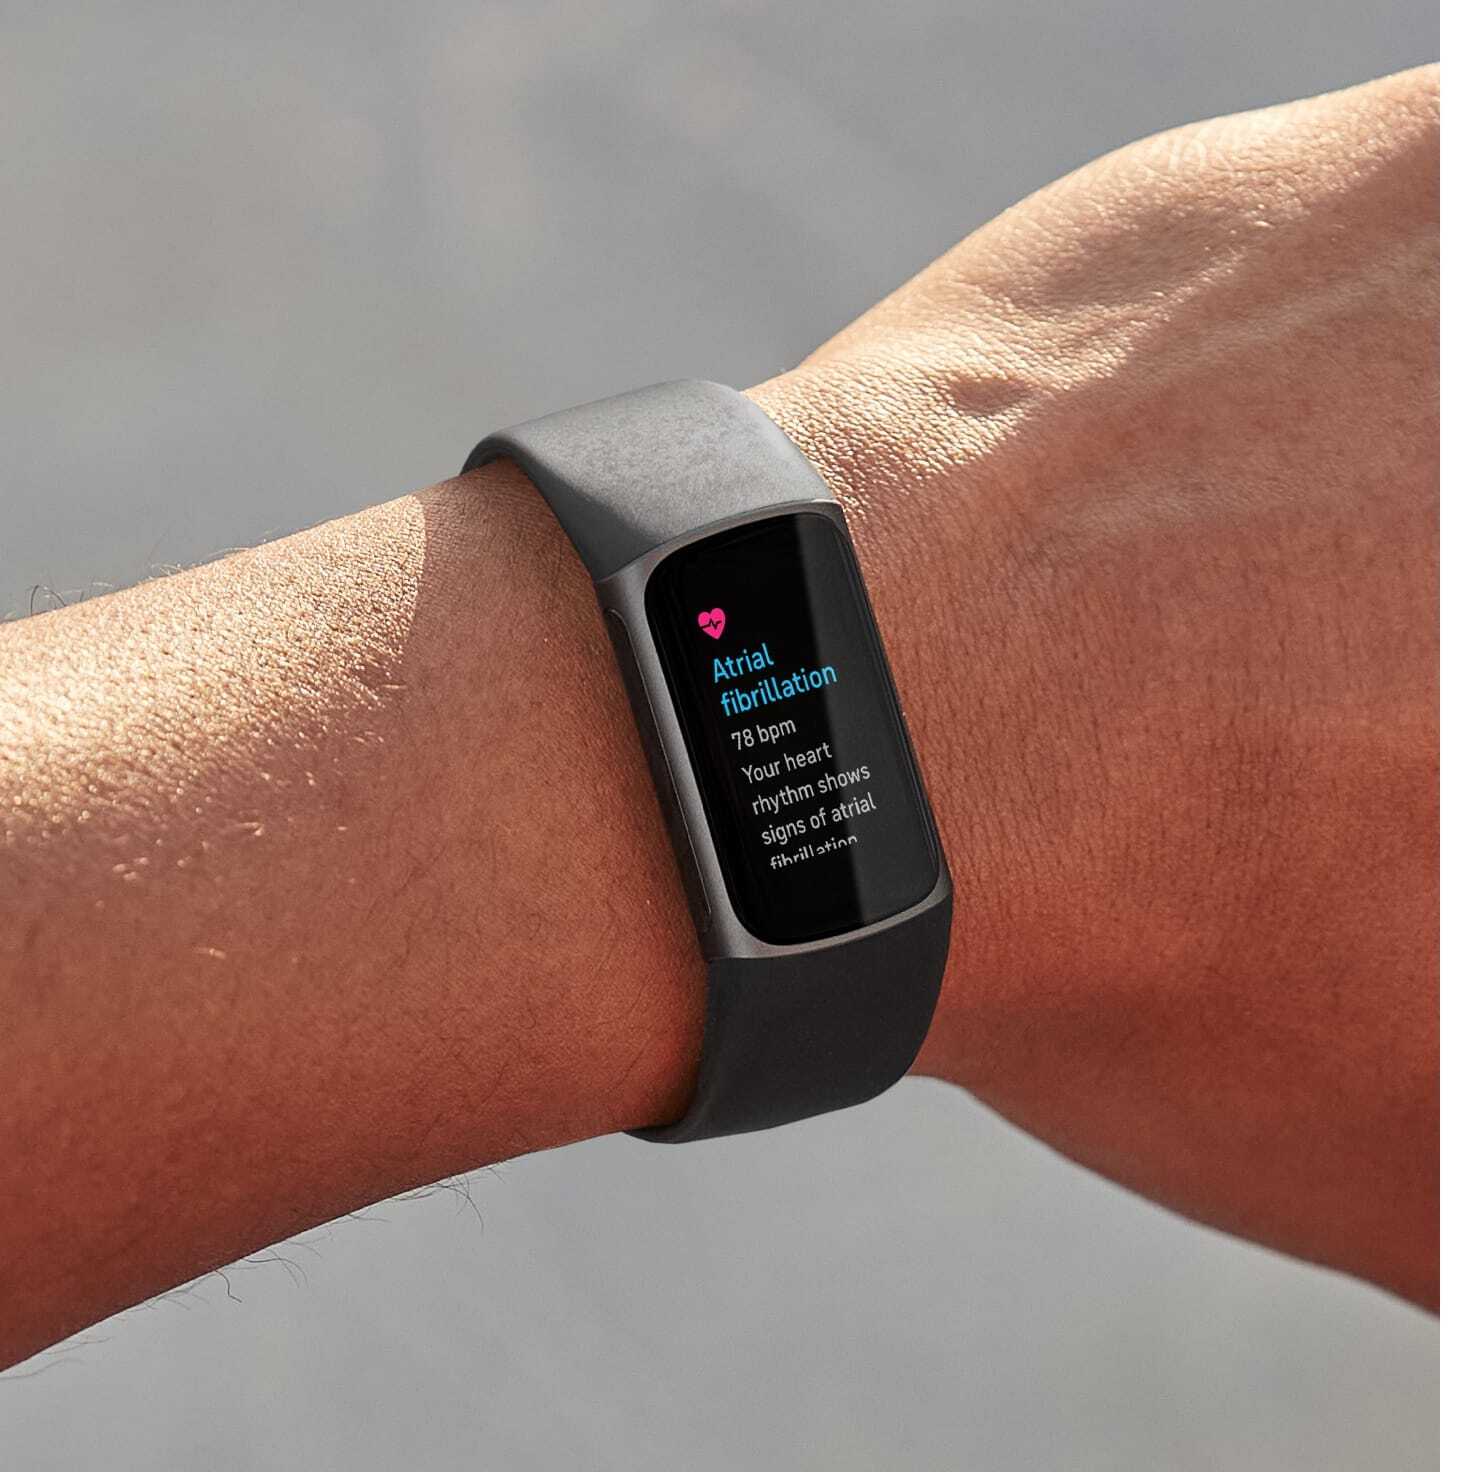 Certain Fitbit models support ECG readings to help detect AFib - Fitbit gets FDA approval to use its algorithm to detect a serious heart condition